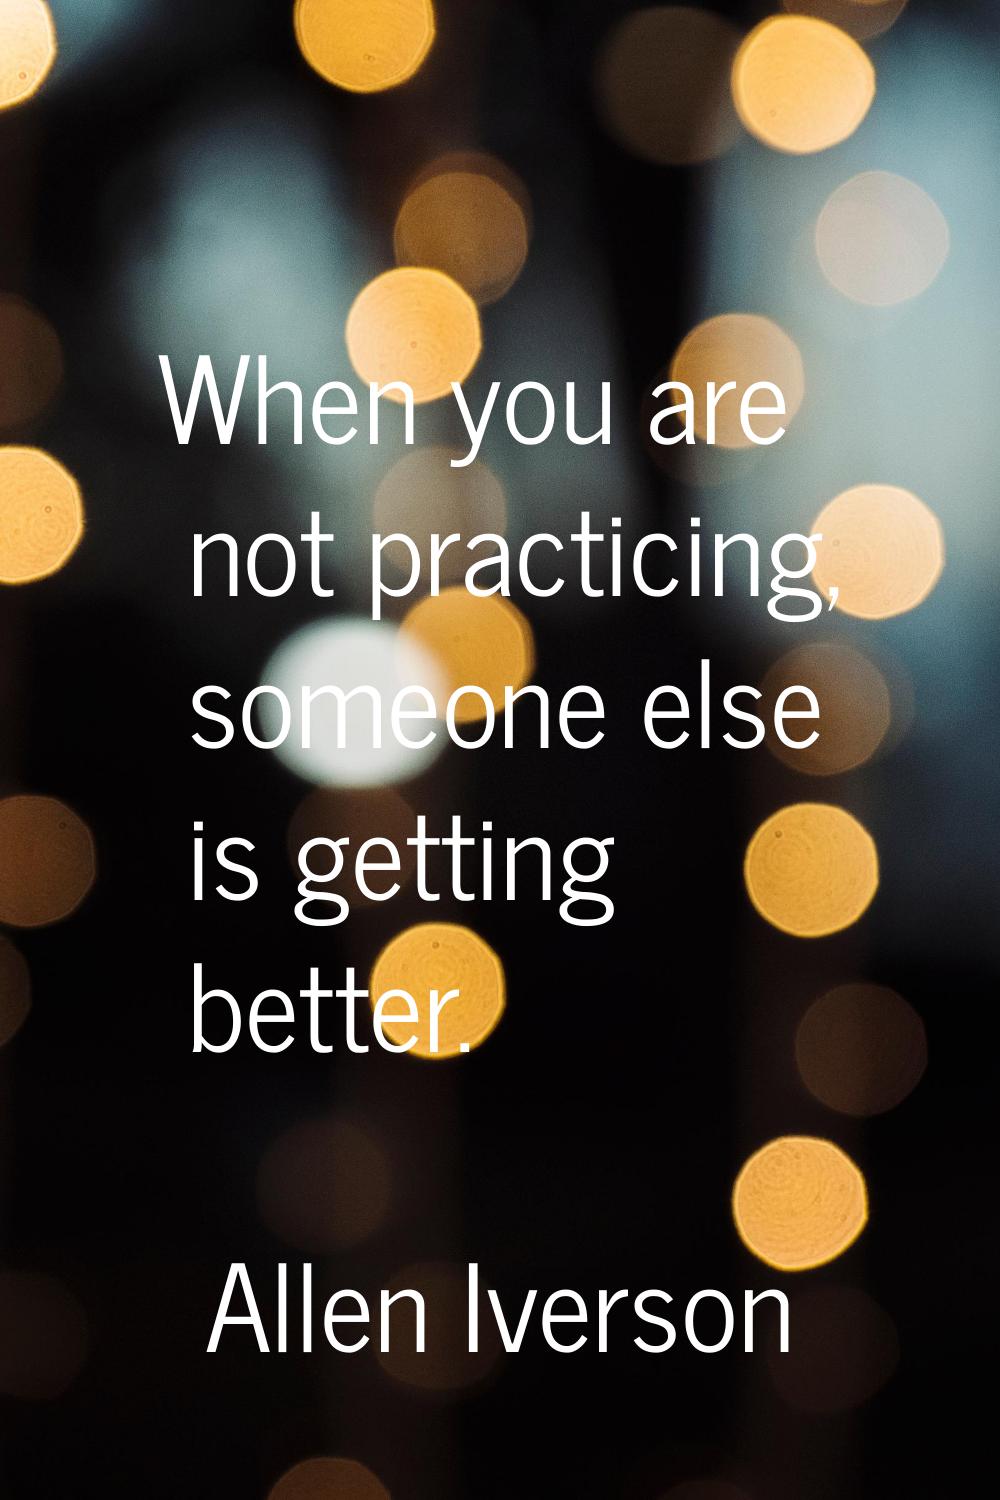 When you are not practicing, someone else is getting better.